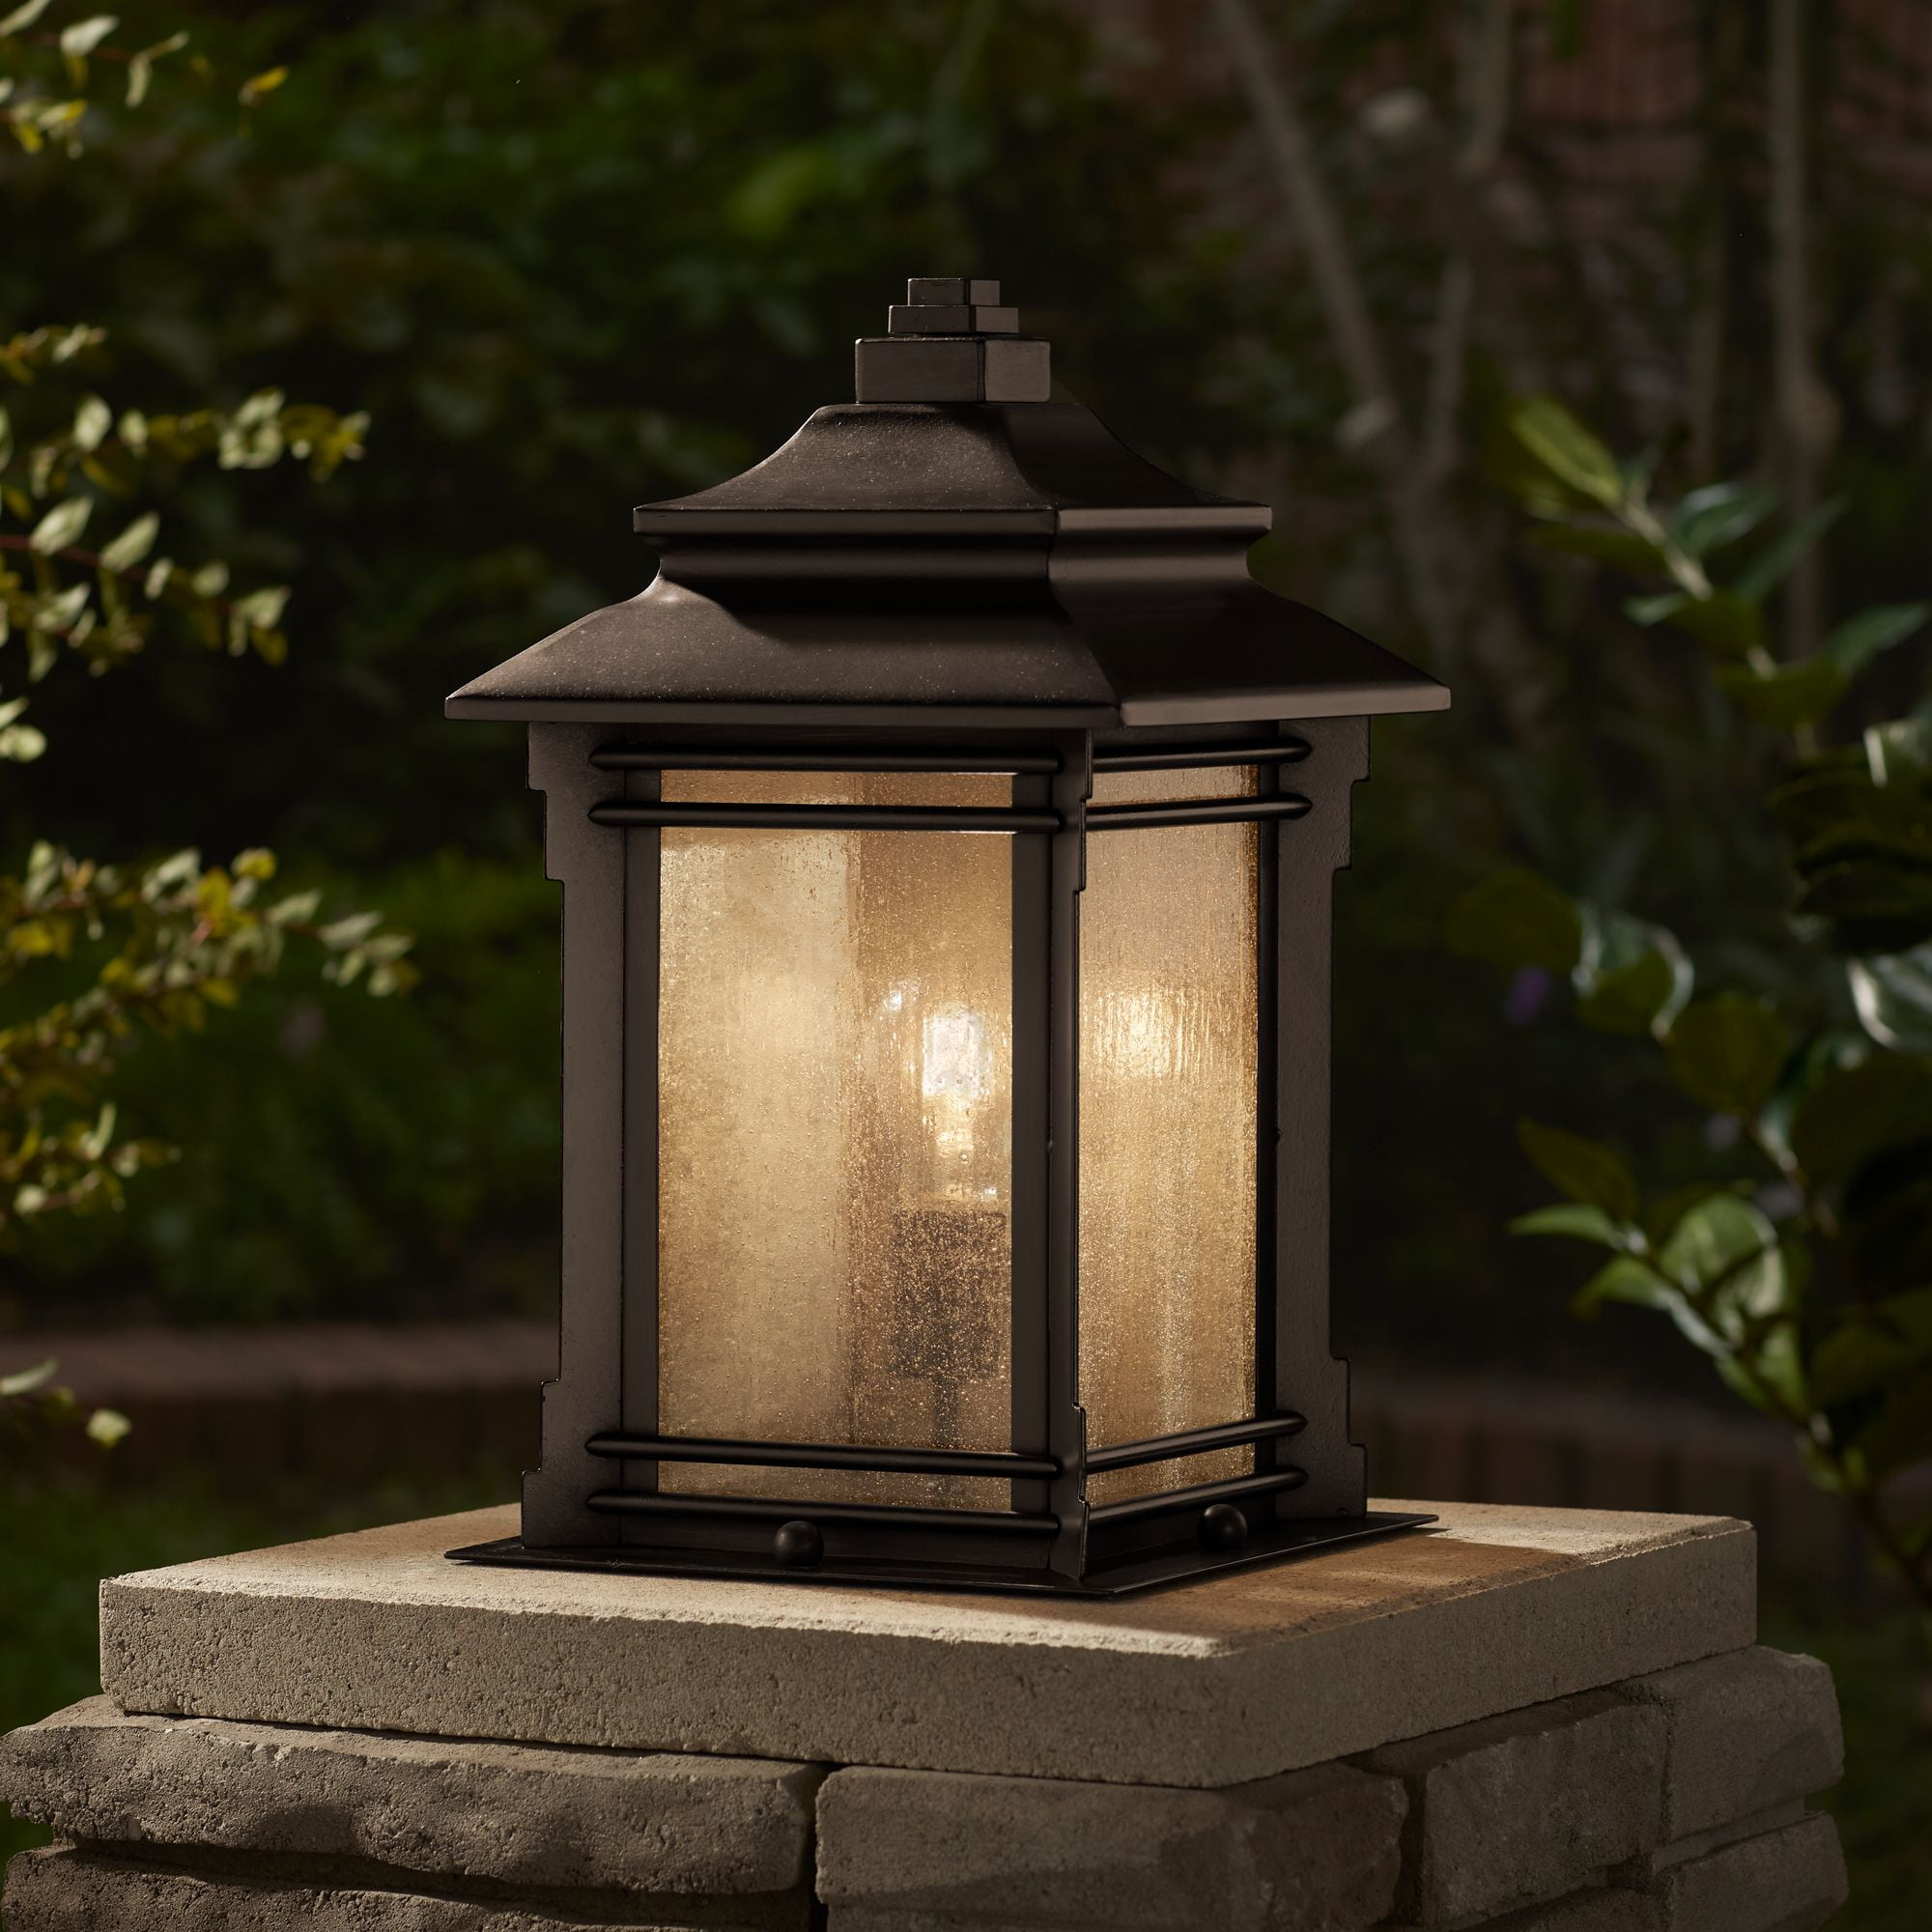 Franklin Iron Works Hickory Point Rustic Farmhouse Outdoor Pier Light Walnut Bronze 16 1/2" Frosted Cream for Exterior Barn Deck House - Walmart.com